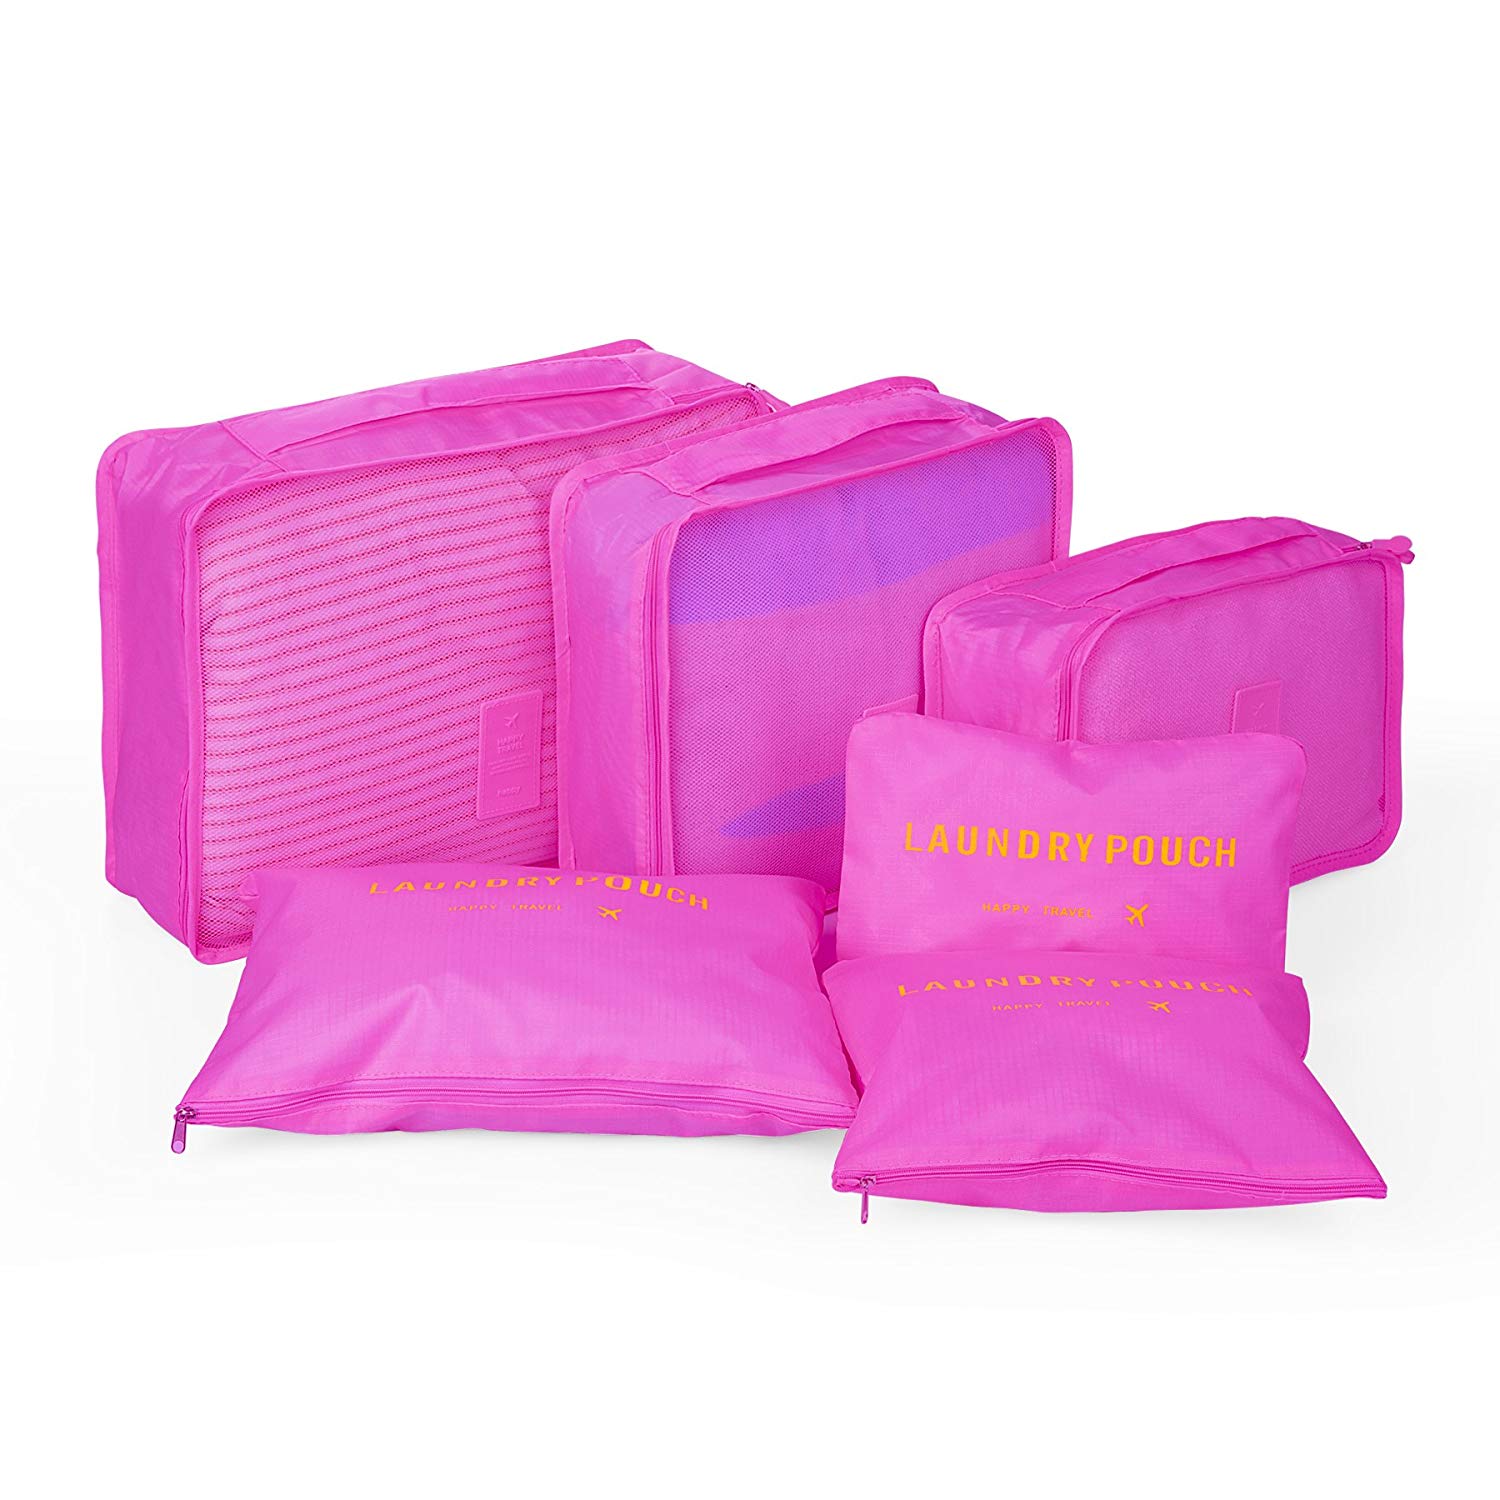 Yoonsic 6 Sets Packing Cubes for Travel/Trip - 3 Cubes + 3 Pouches + 4 Bonus Vacuum Bags - Organizers for Carry-on Luggage Clothing and Accessories (rose red)